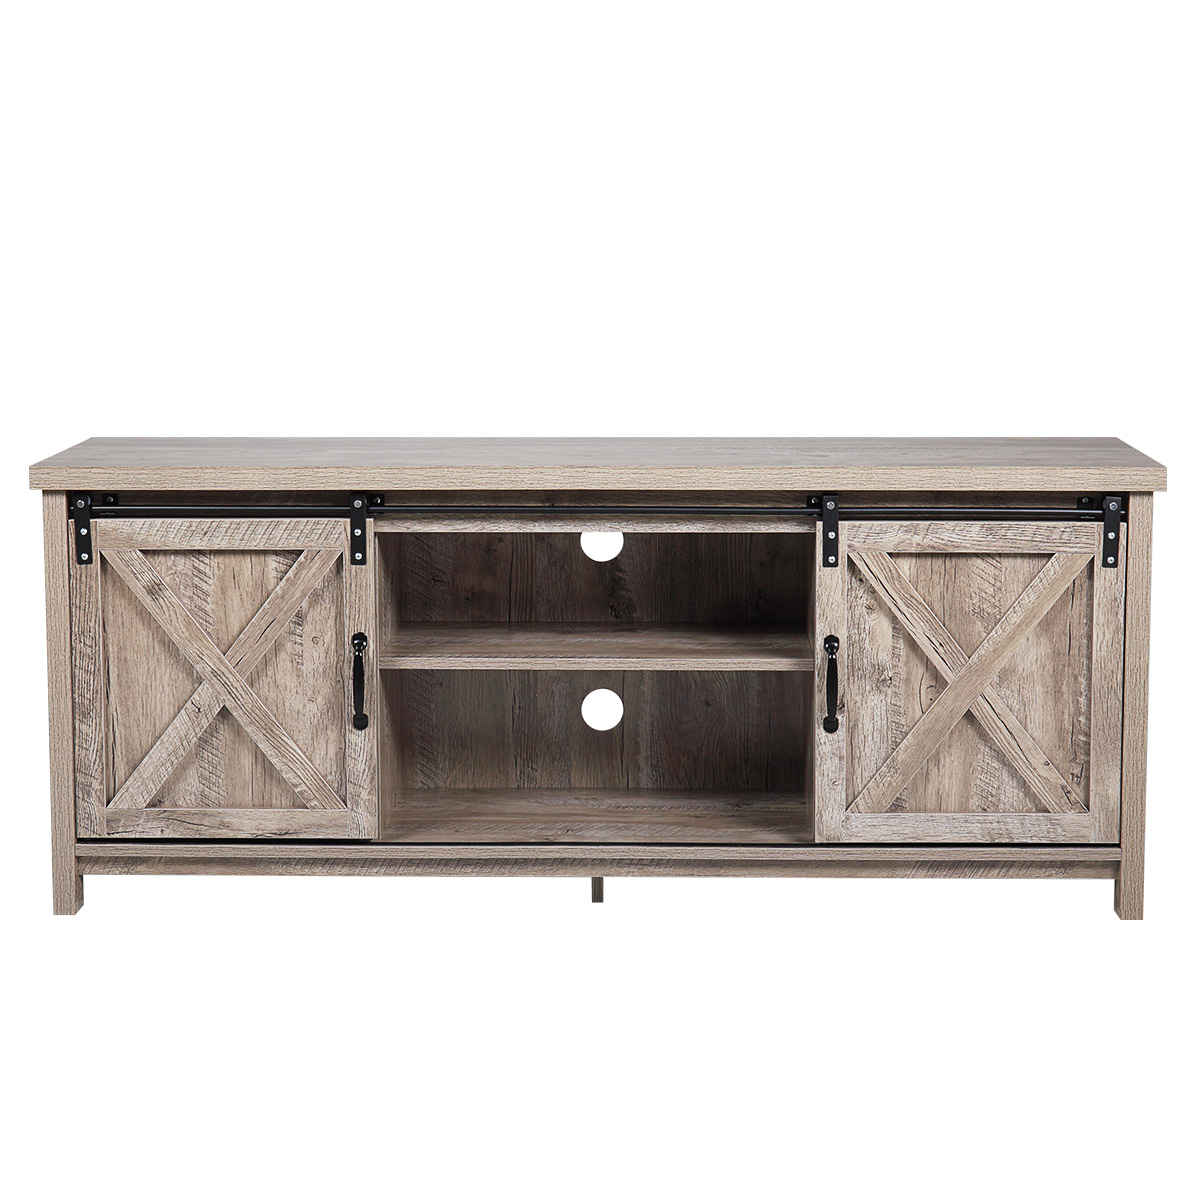 Veryke TV Cabinet Console Table, PB Board TV Stand for Flat Screen TV Cable Box Gaming Consoles - image 3 of 8